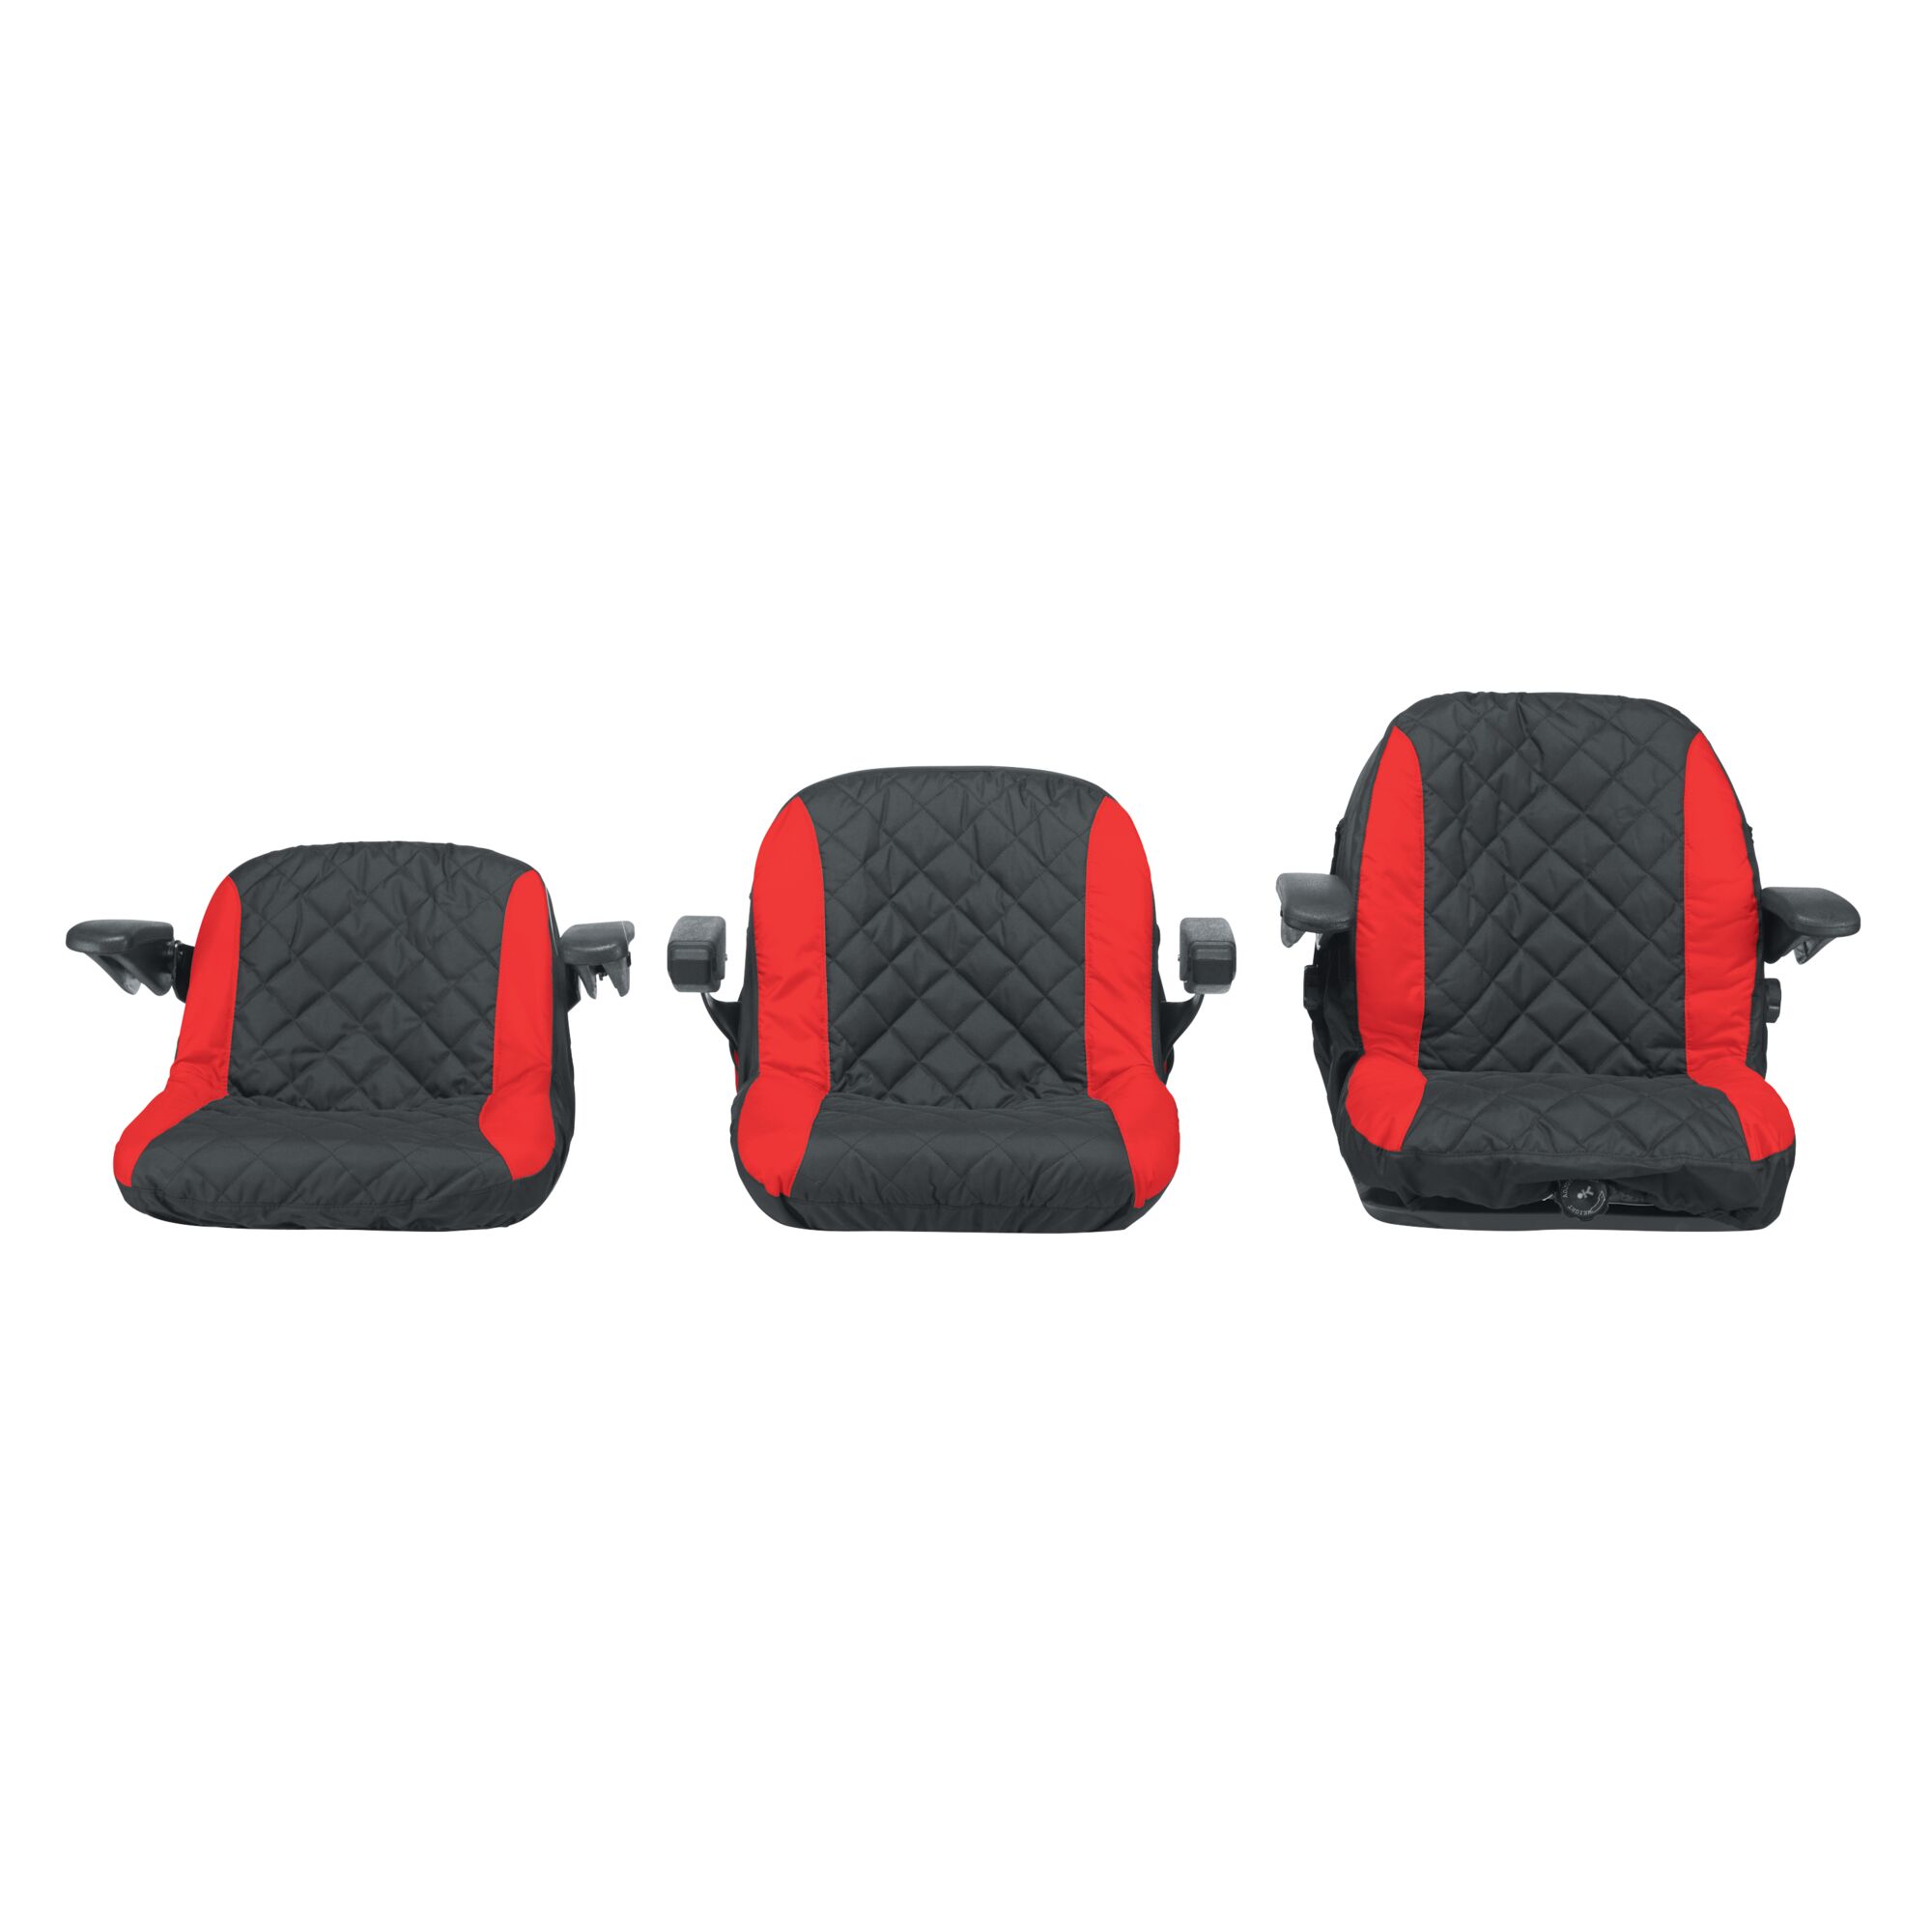 Profile of three Riding Lawn Mower Seat Covers.